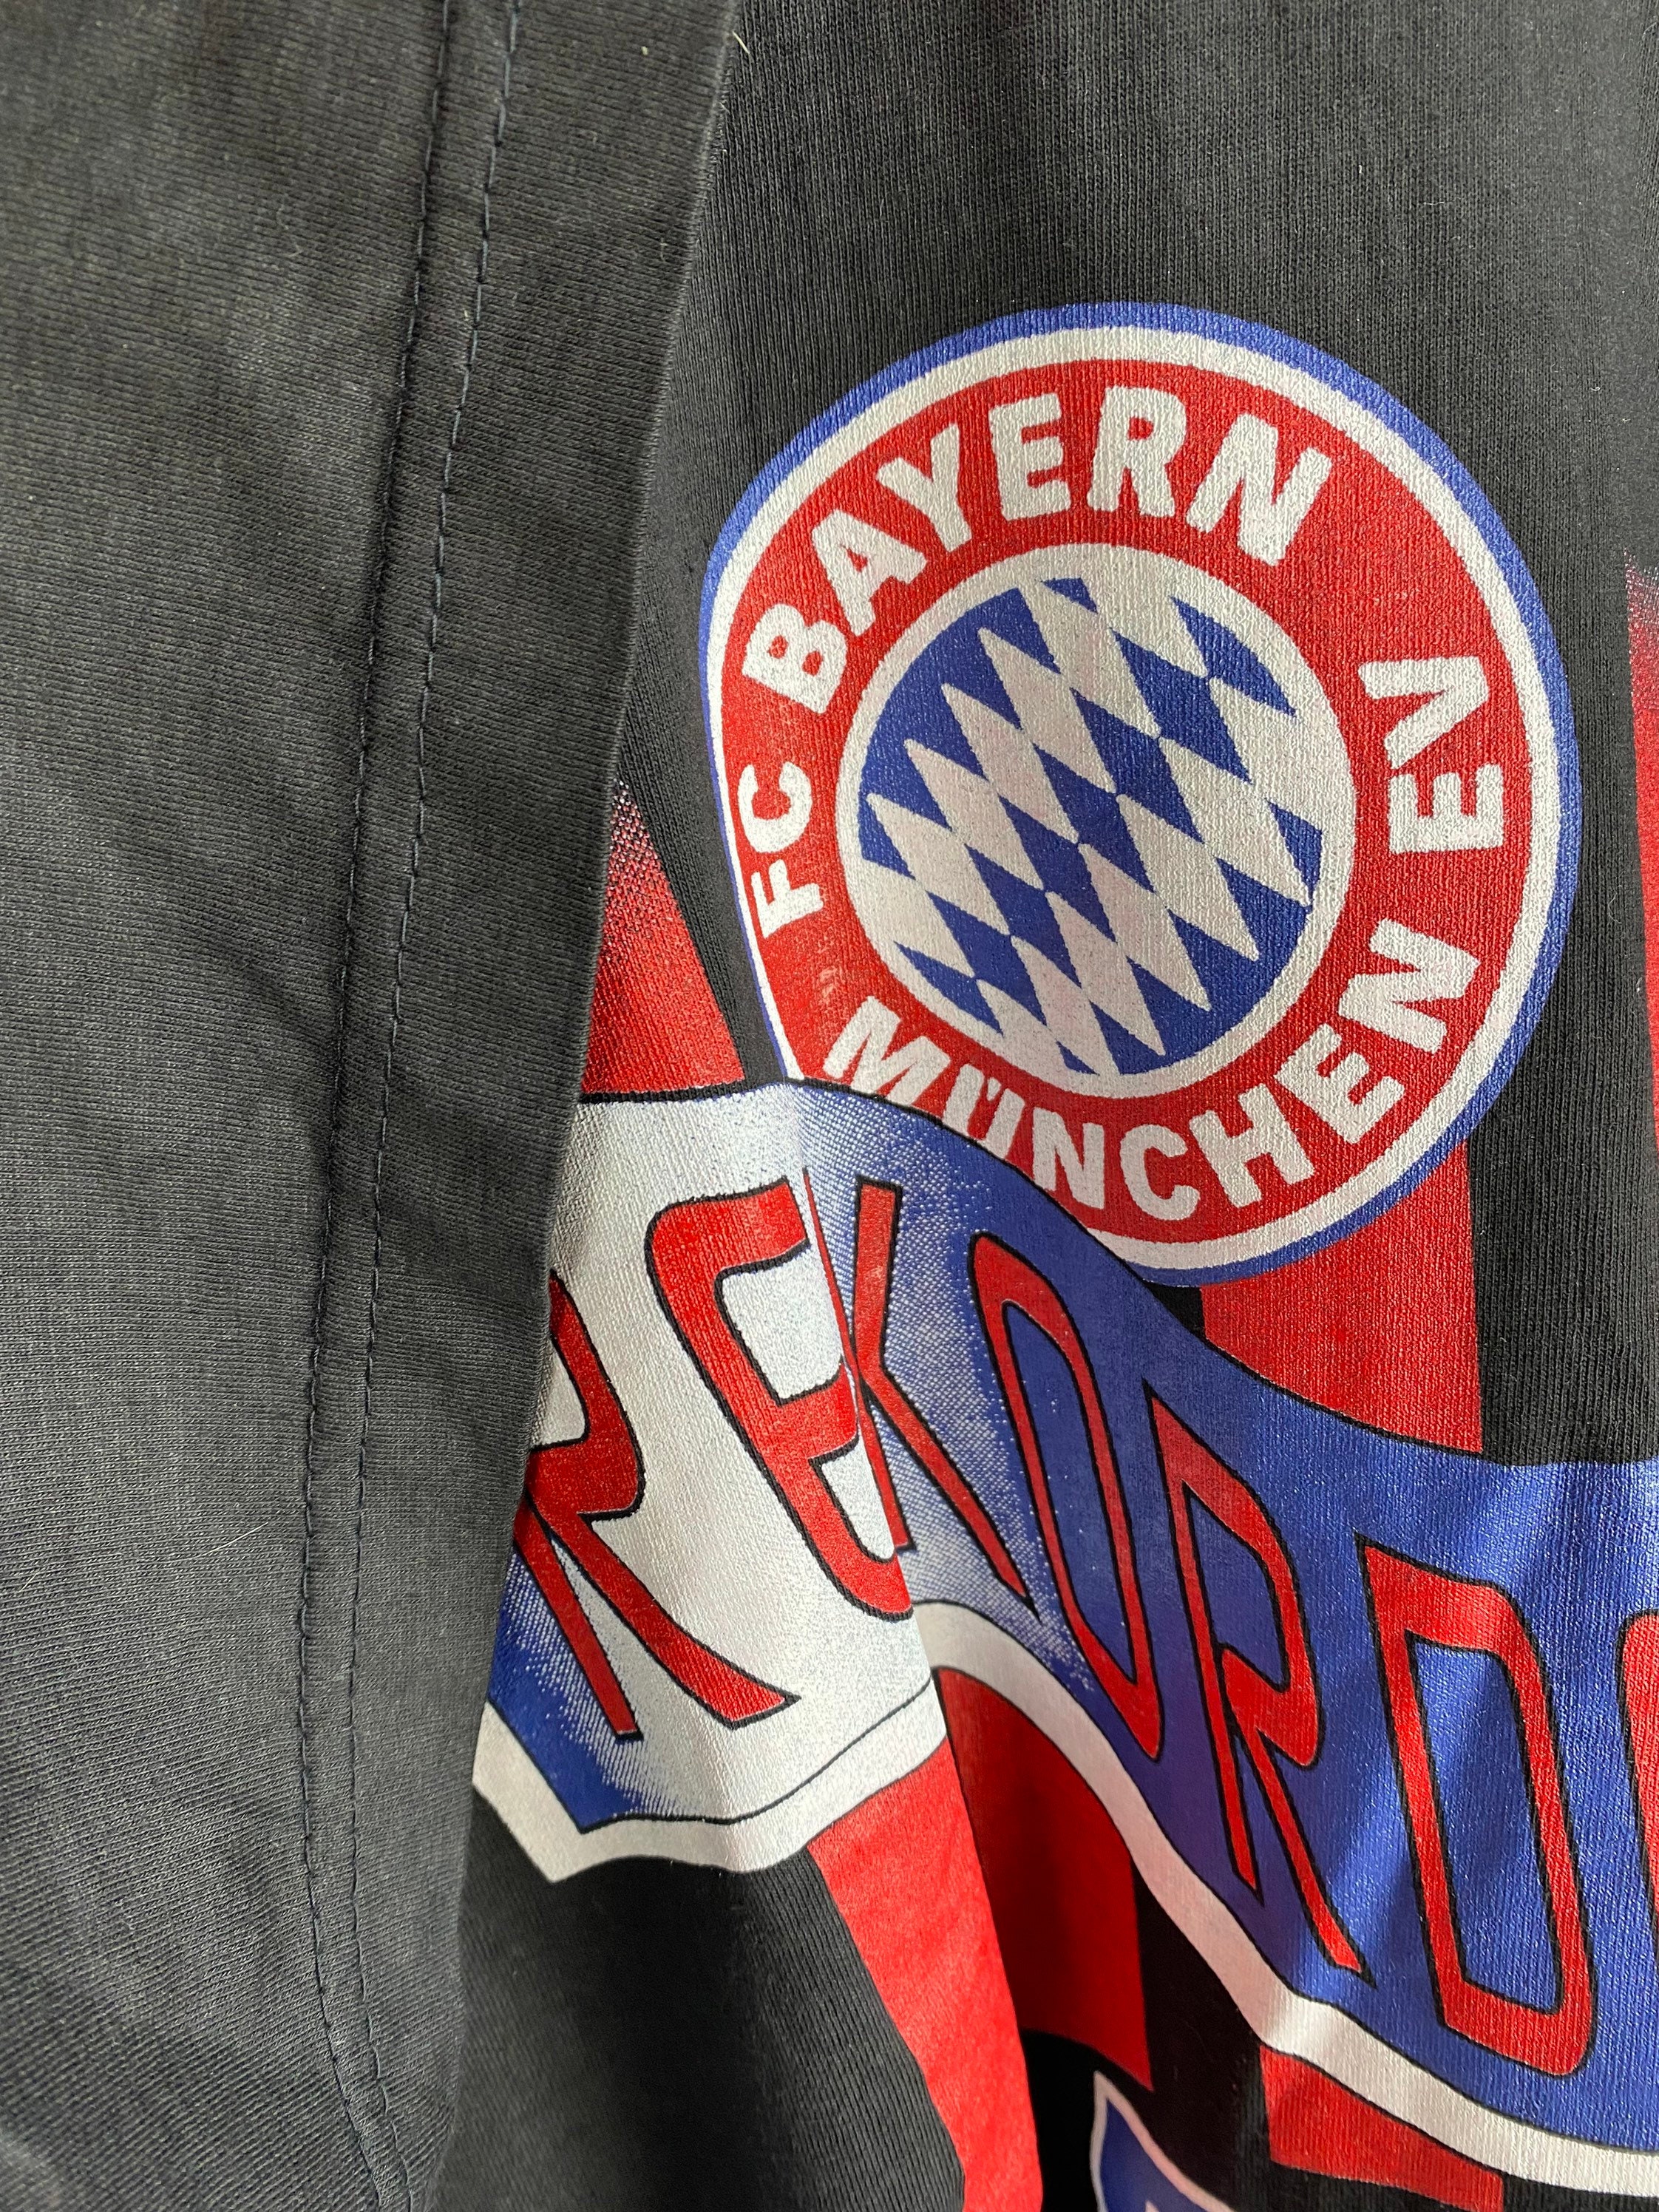 Discover Bayern Mnchen 90s vintage Fuball Rekordmeister T-Shirts